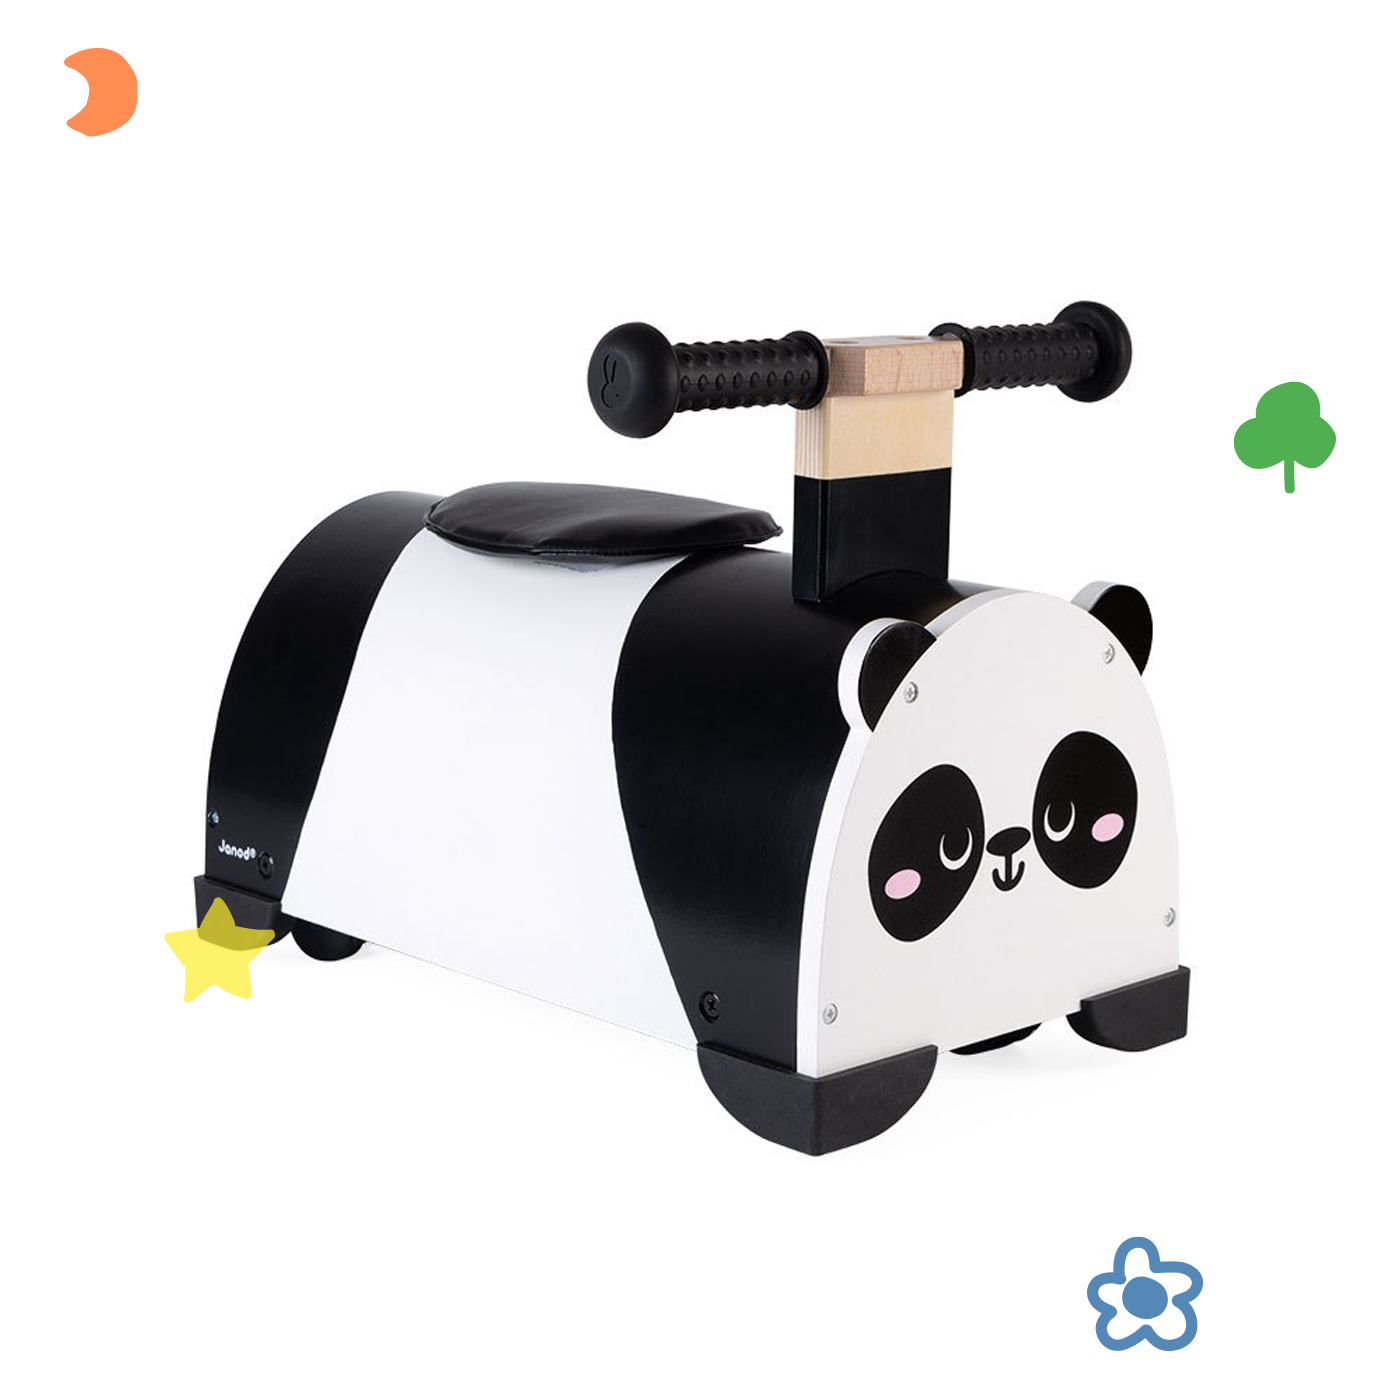 Janod Panda Ride-On, panda scooter, toy box club, ride on scooter,wooden balance scooter